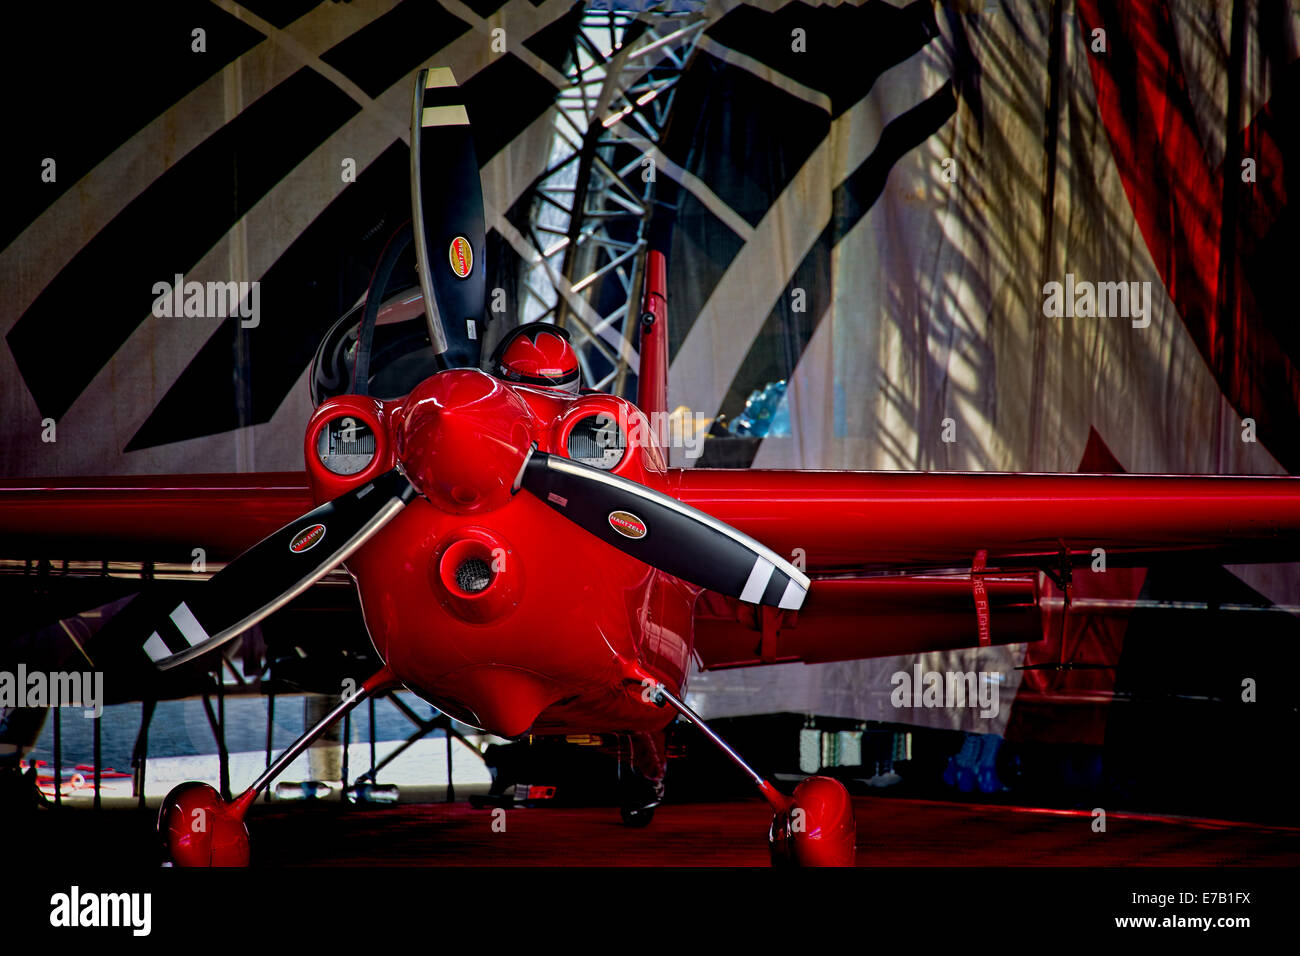 Pete McLeod Edge 540 in hangar ready for Redbull Air Race at Texas Motor Speedway Stock Photo